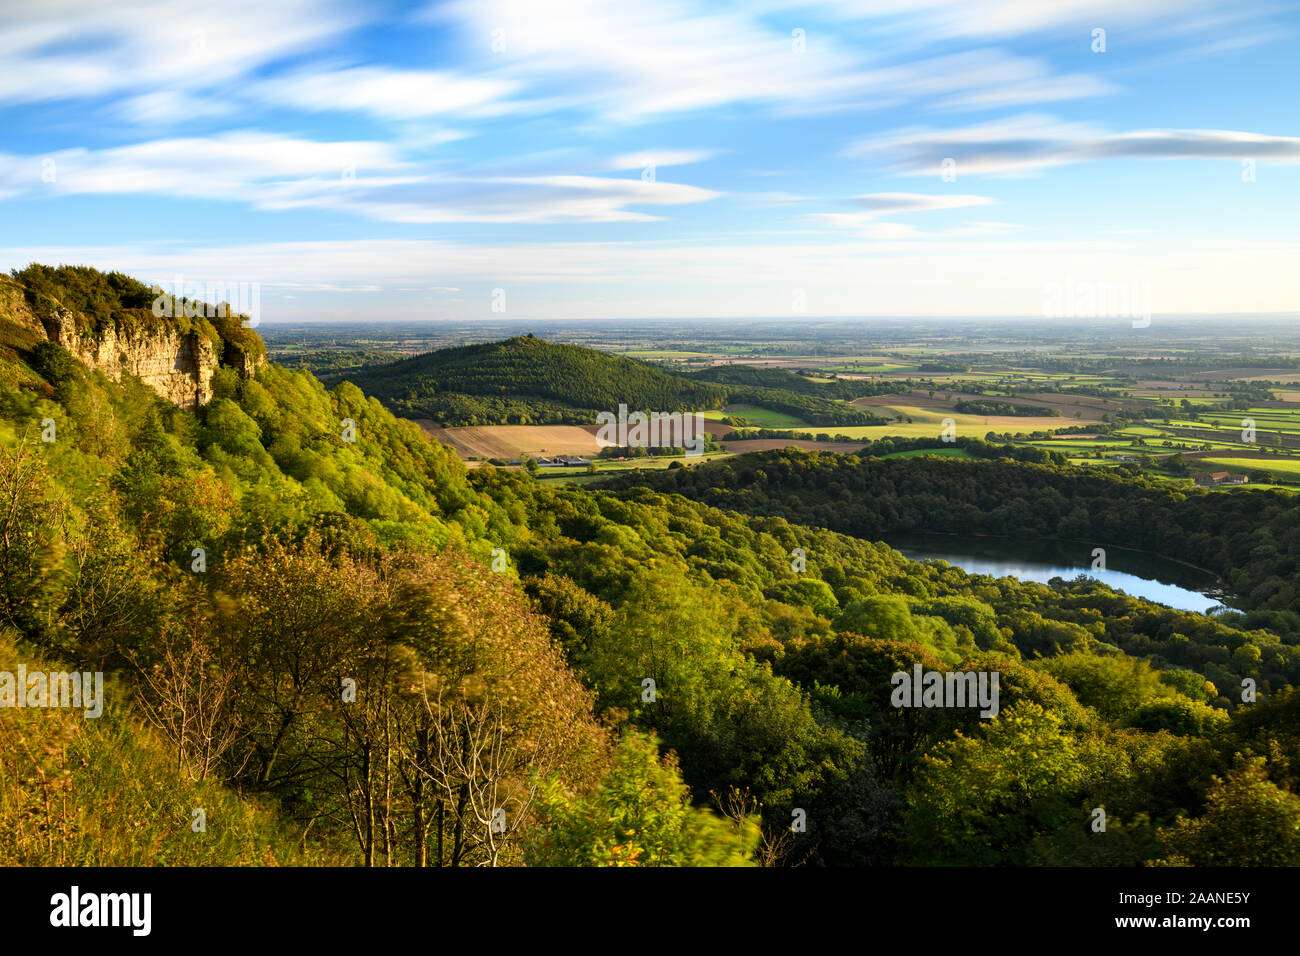 Beautiful scenic long-distance view (Lake Gormire, Hood Hill, Whitestone Cliff, countryside & blue sky) - Sutton Bank, North Yorkshire, England, UK. Stock Photo